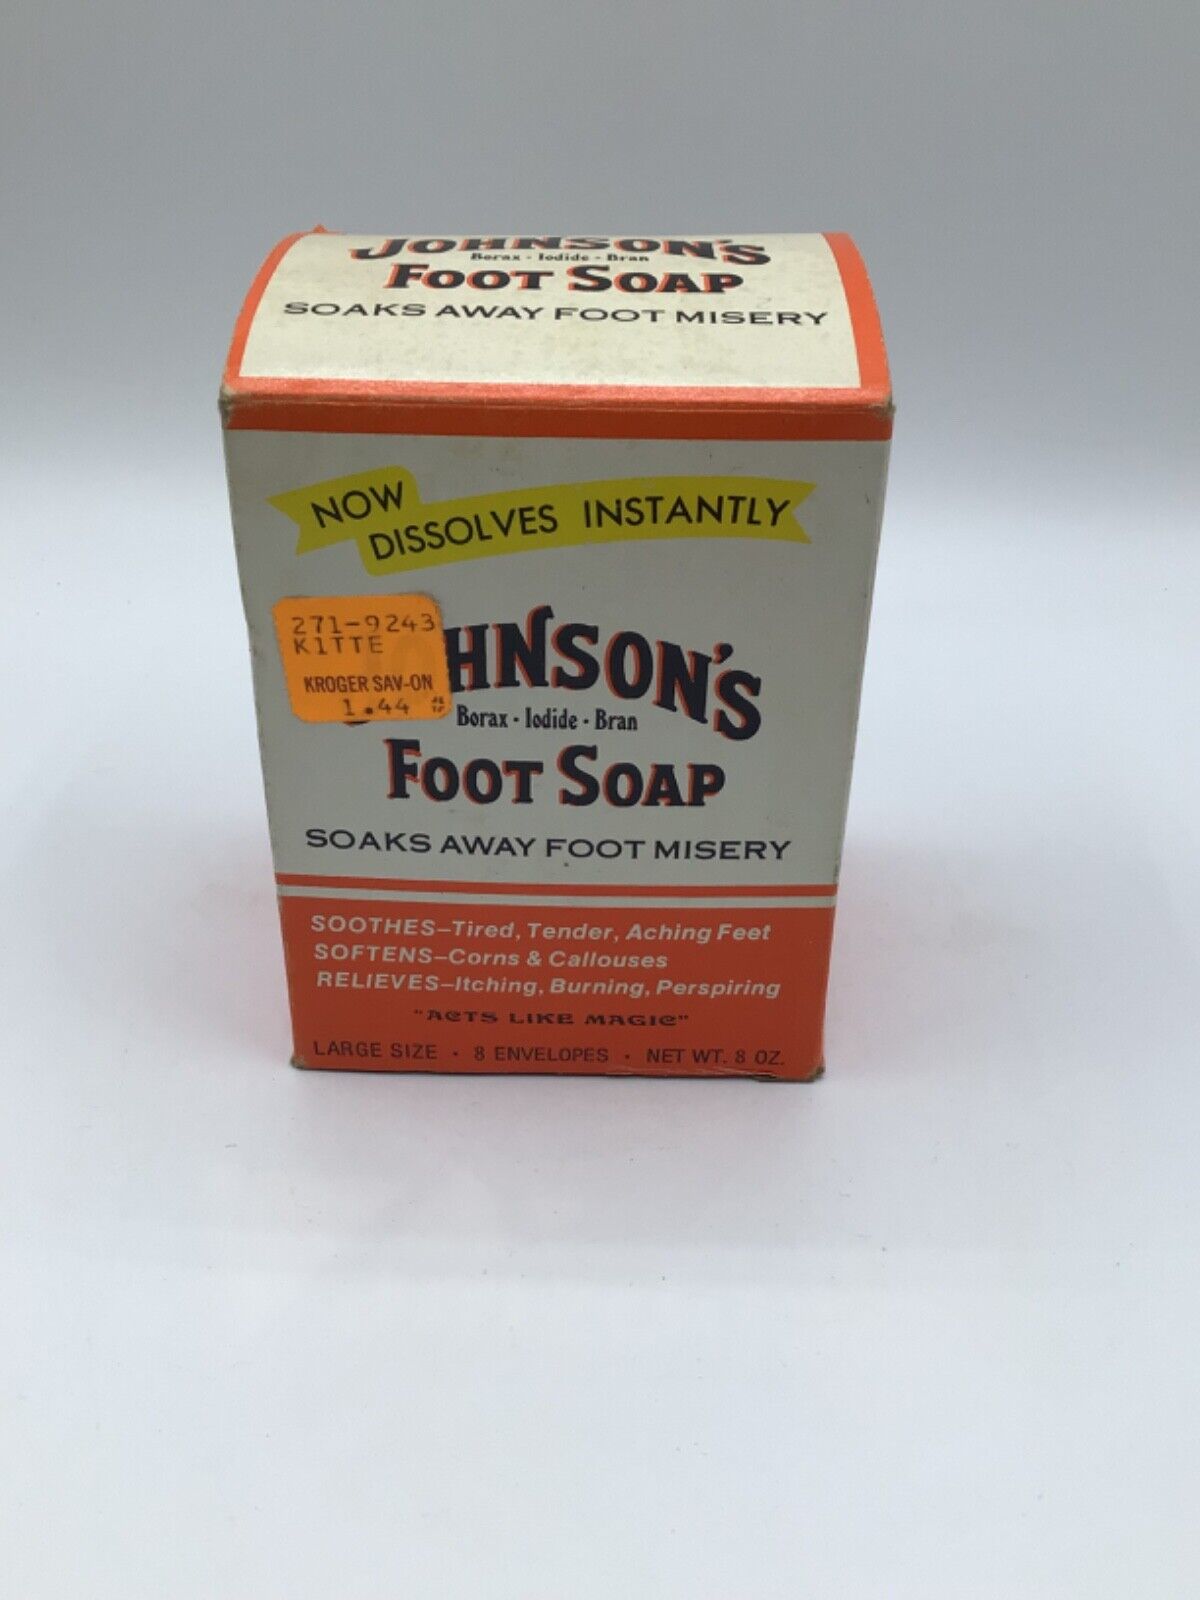 Vintage Johnsons Foot Soap Value Size 8 Packets New Old Stock Discontinued